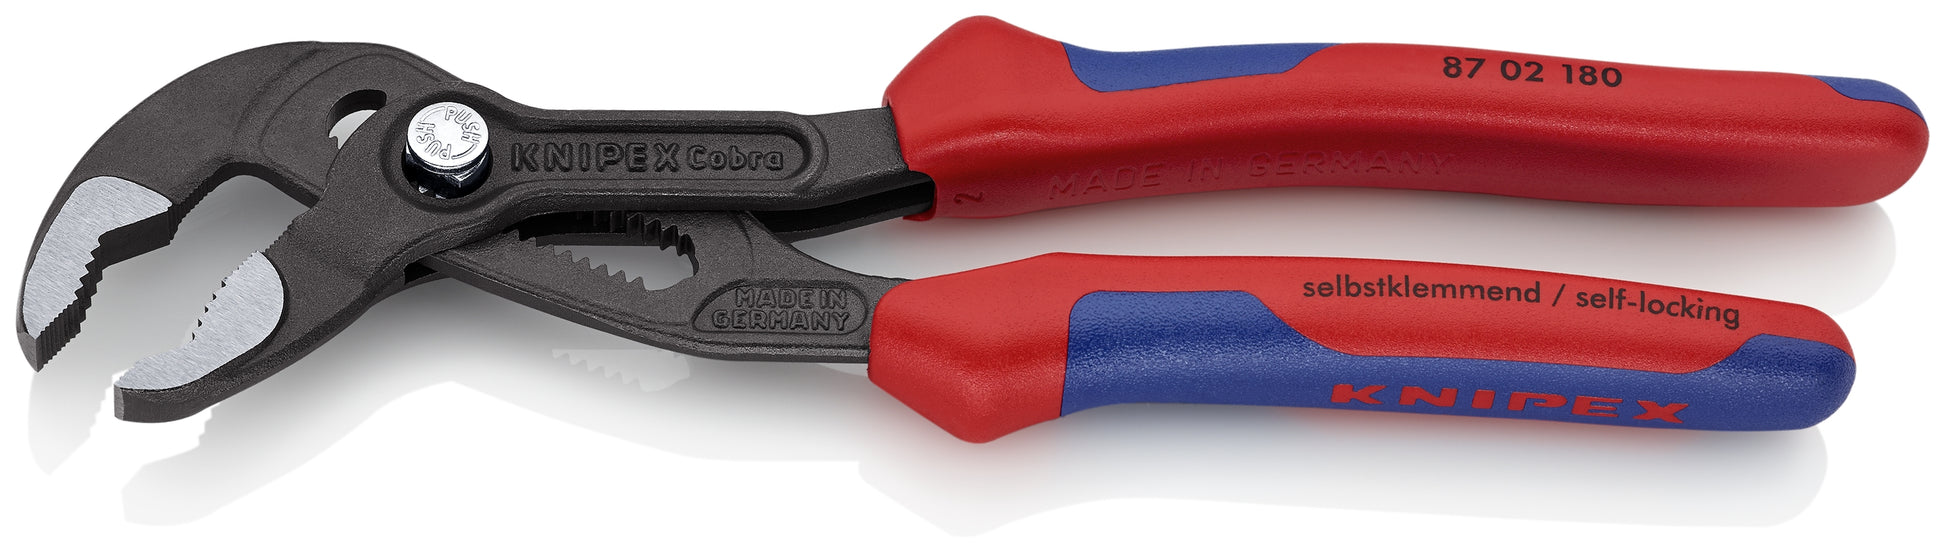 KNIPEX KNIPEX 87 02 180 Cobra® High-Tech Water Pump Pliers with